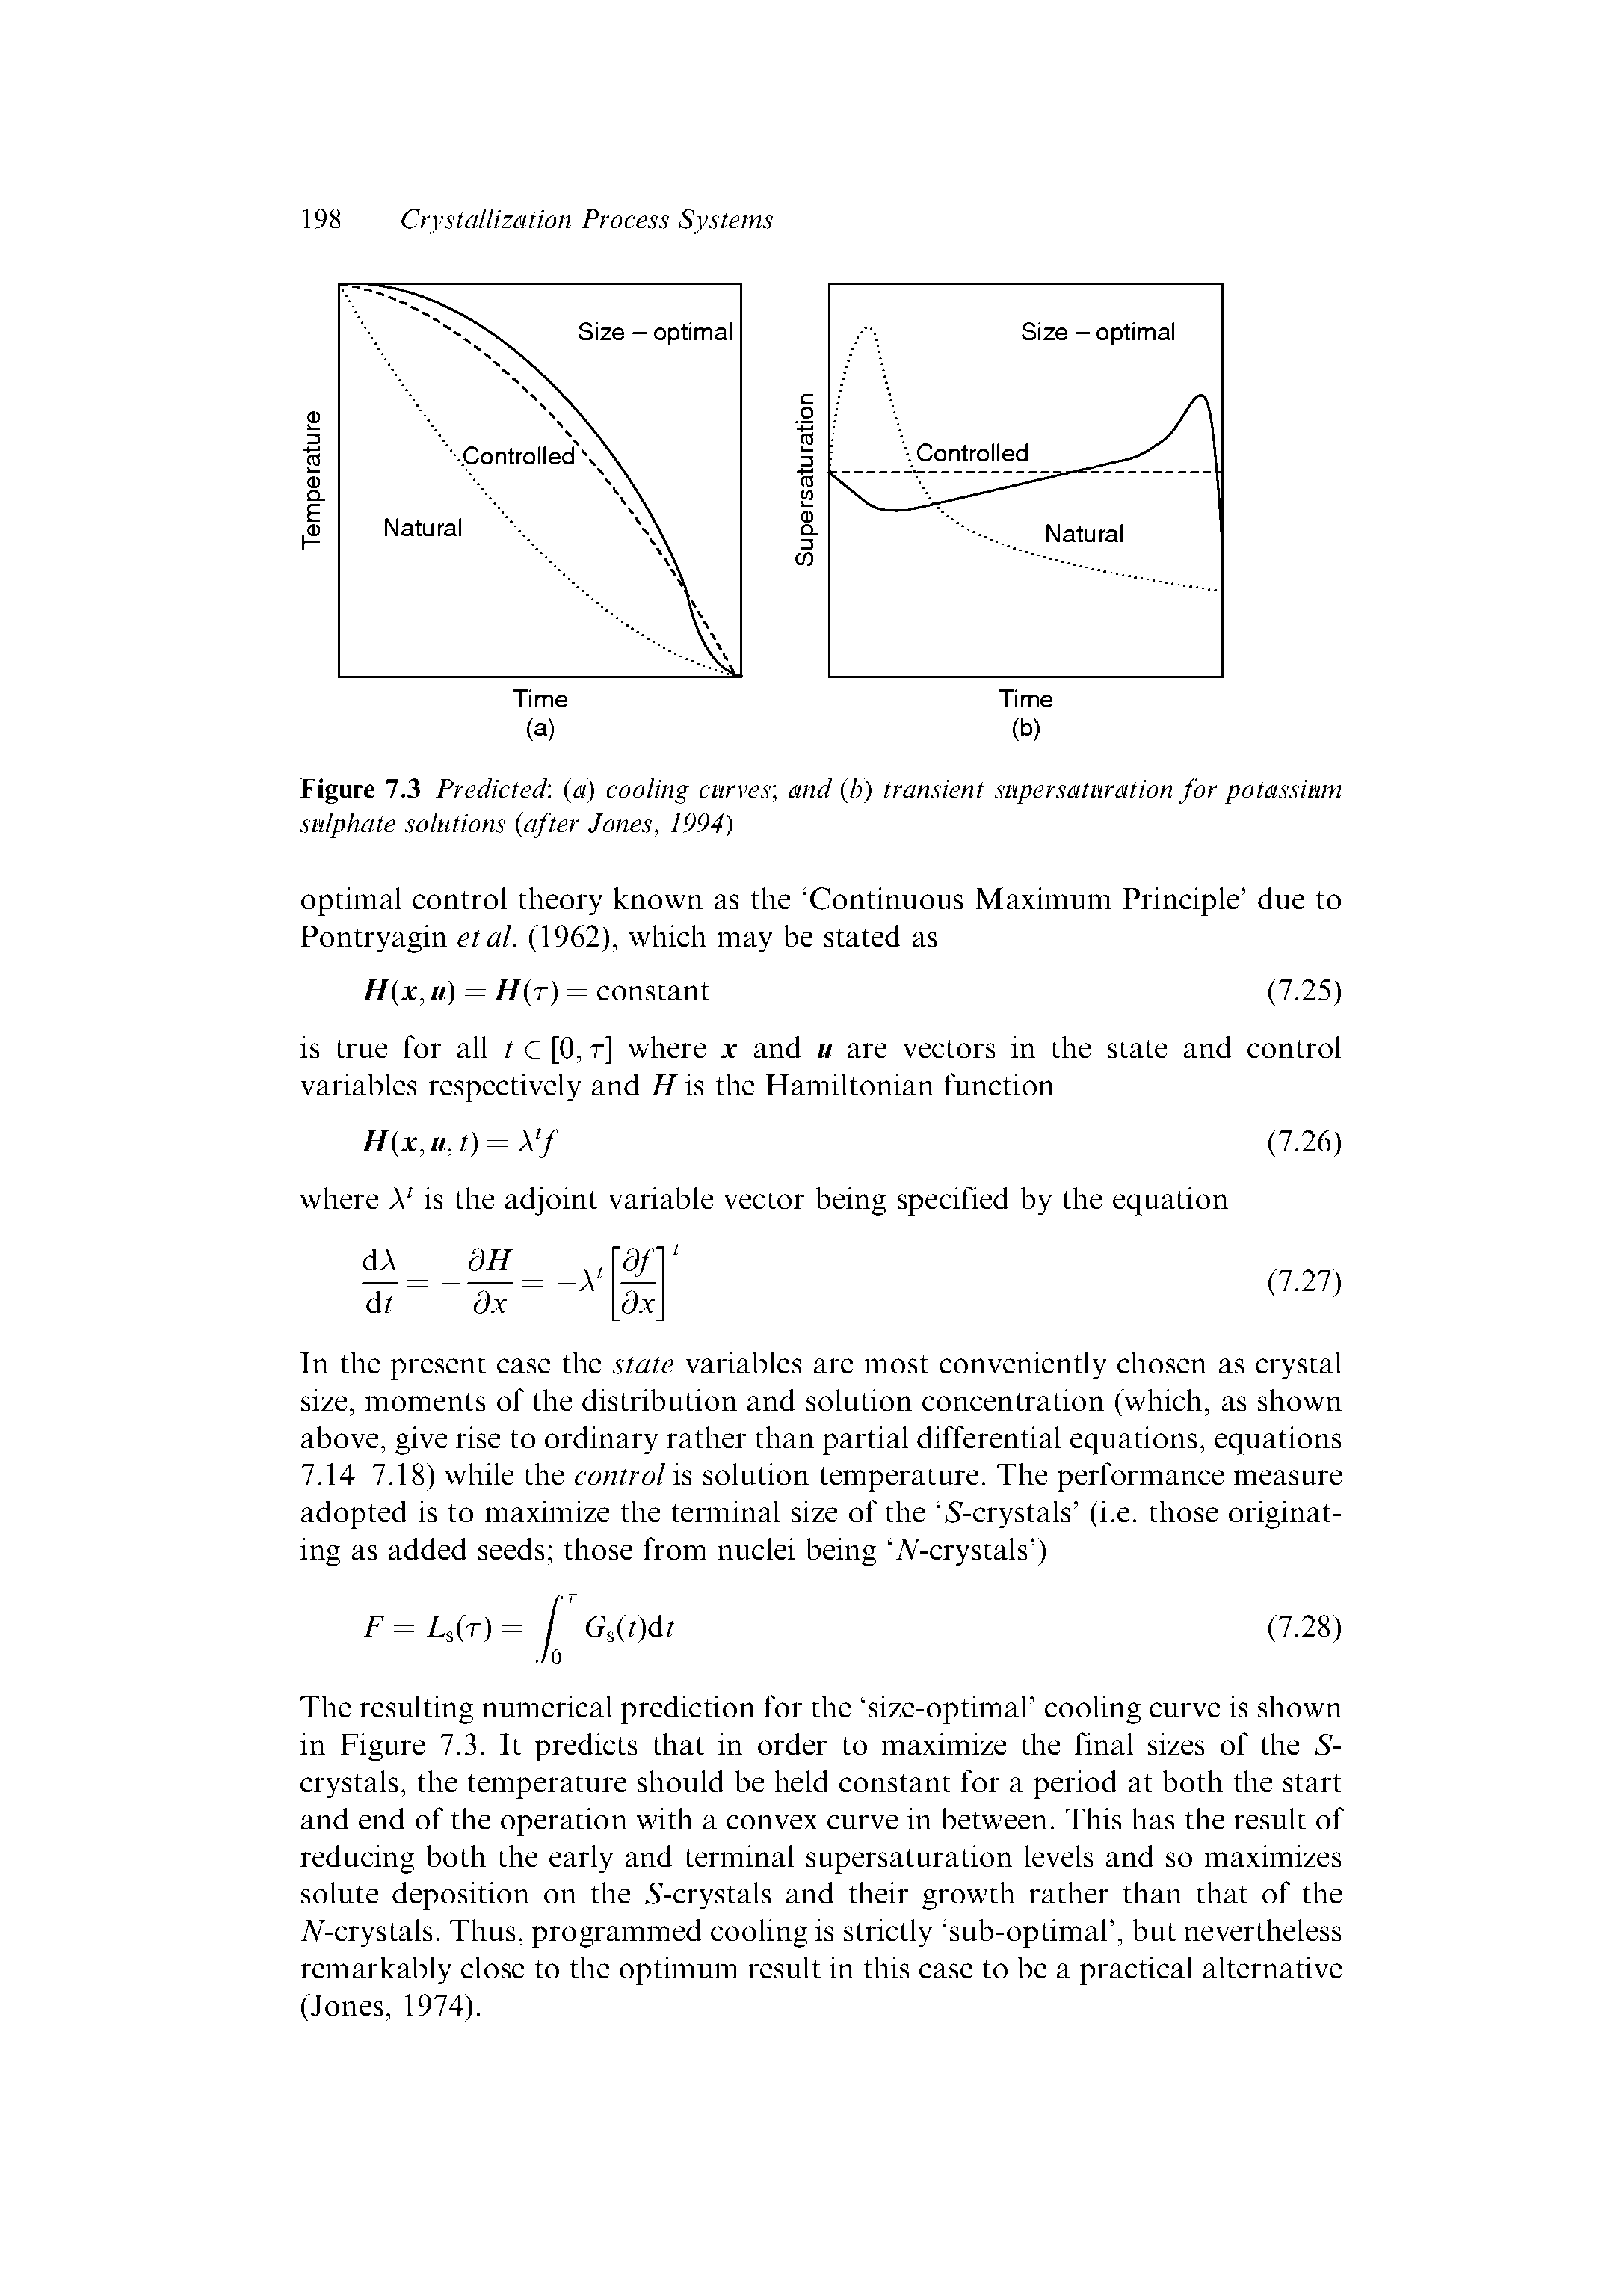 Figure 7.3 Predicted, (a) cooling curves, and (h) transient. supersaturation for potassium sulphate solutions after Jones, 1994)...